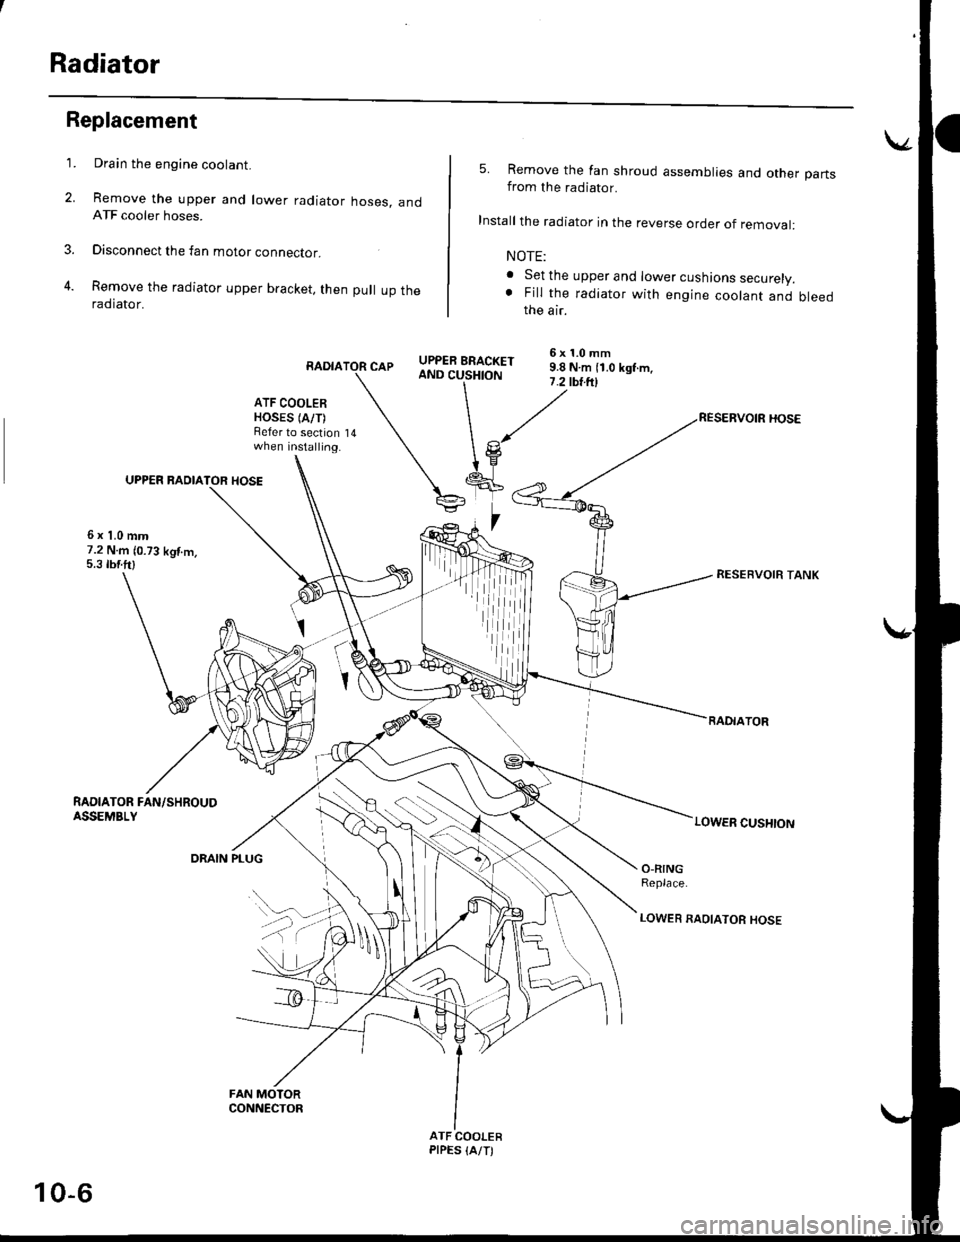 HONDA CIVIC 1996 6.G User Guide Radiator
Replacement
Drain the engine coolant.
Remove the upper and lower radiator hoses, andATF cooler hoses.
Disconnect the fan motor connector.
Remove the radiator upper bracket, then pull up thera